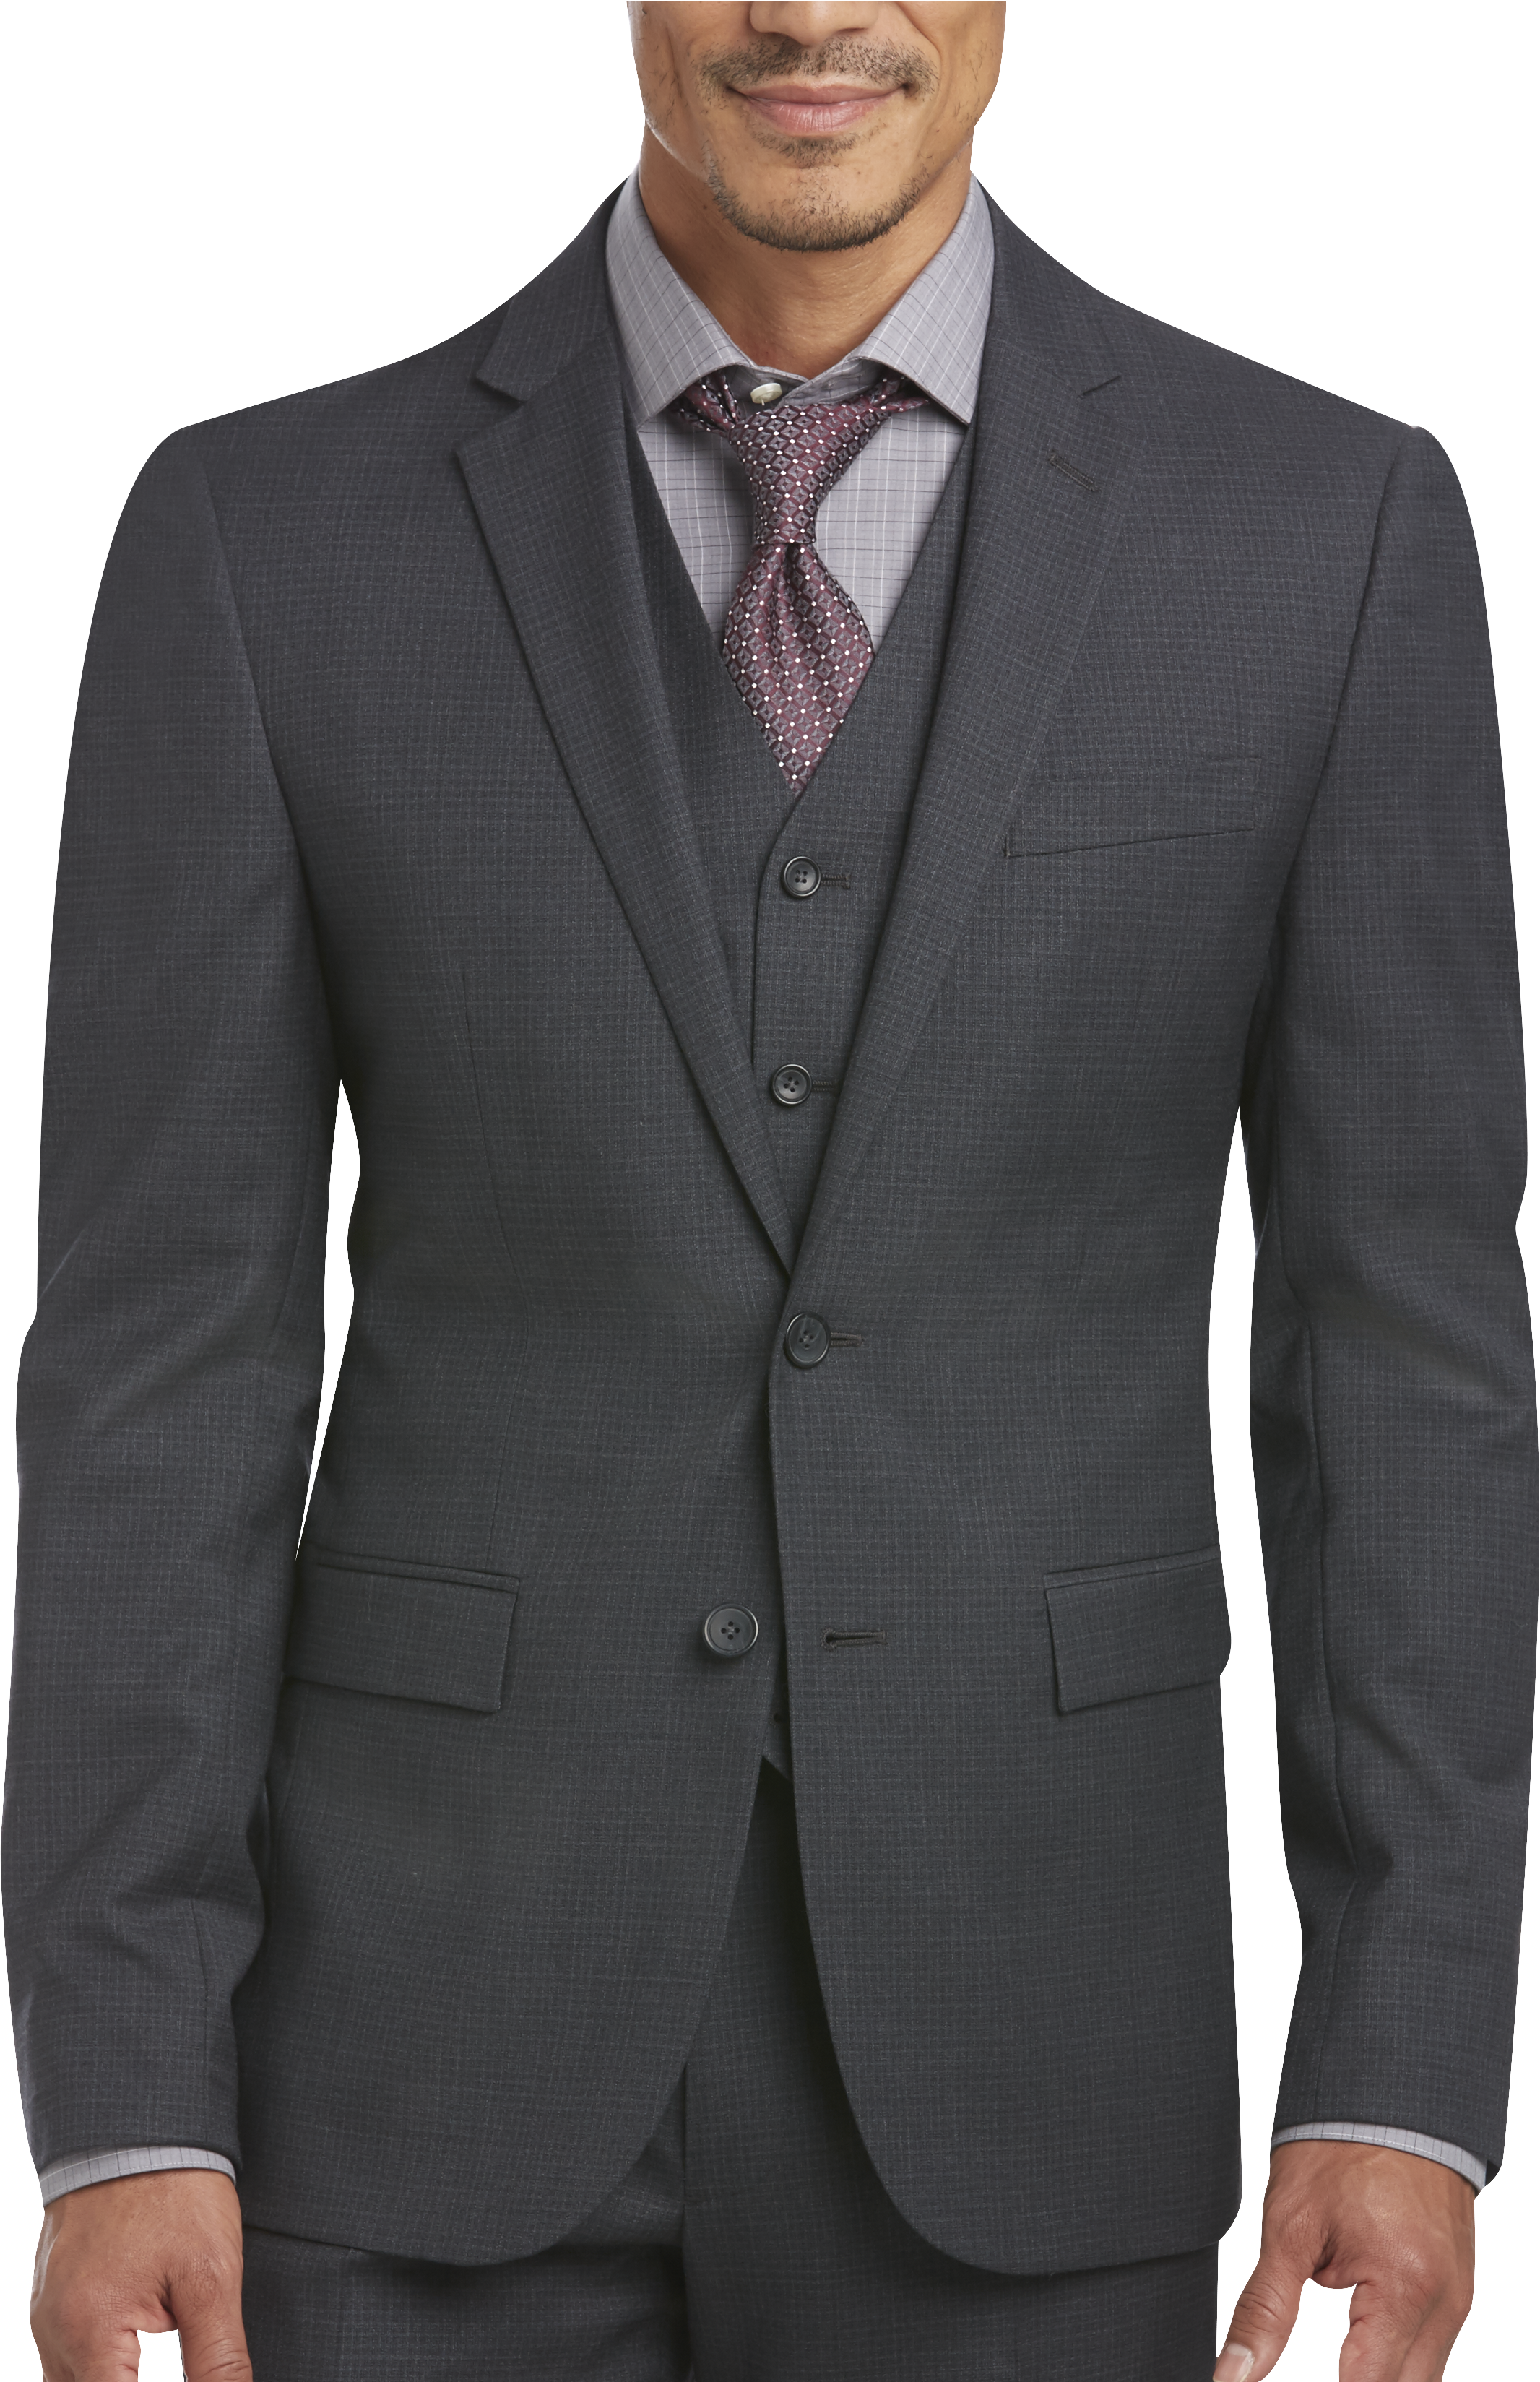 Awearness Kenneth Cole Gray Check Extreme Slim Fit Vested Suit - Men's ...